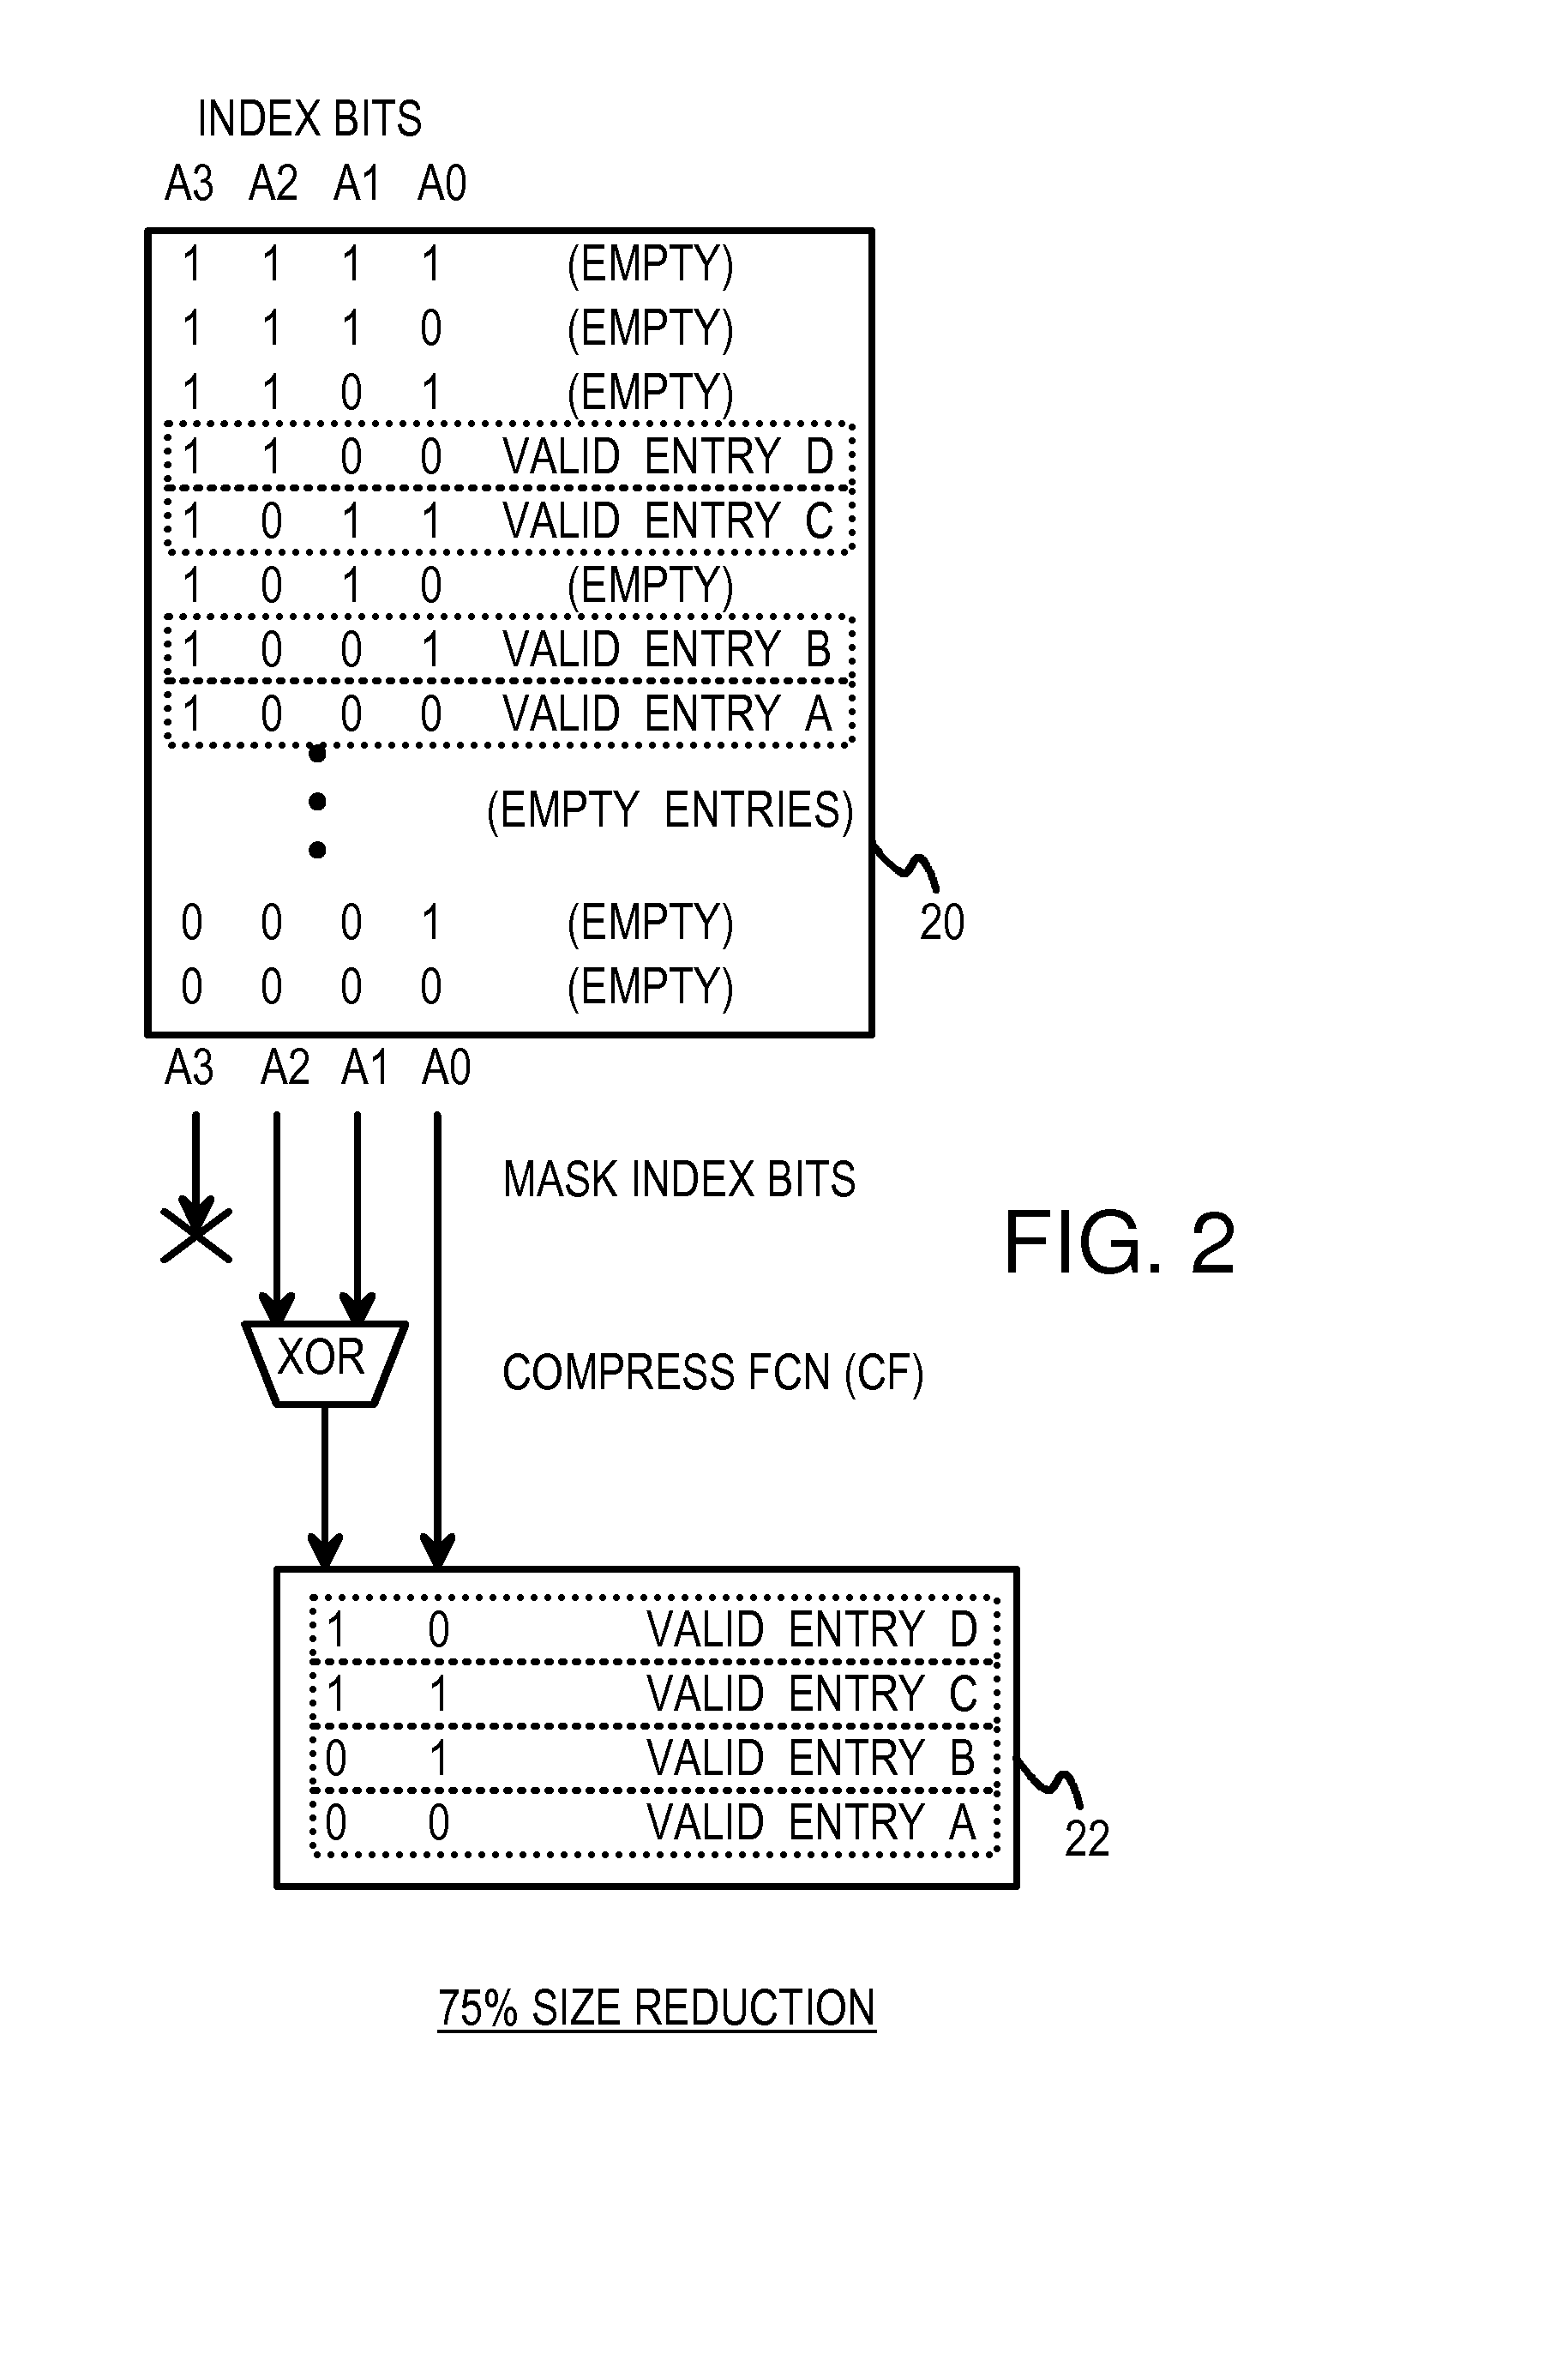 Logical operations encoded by a function table for compressing index bits in multi-level compressed look-up tables